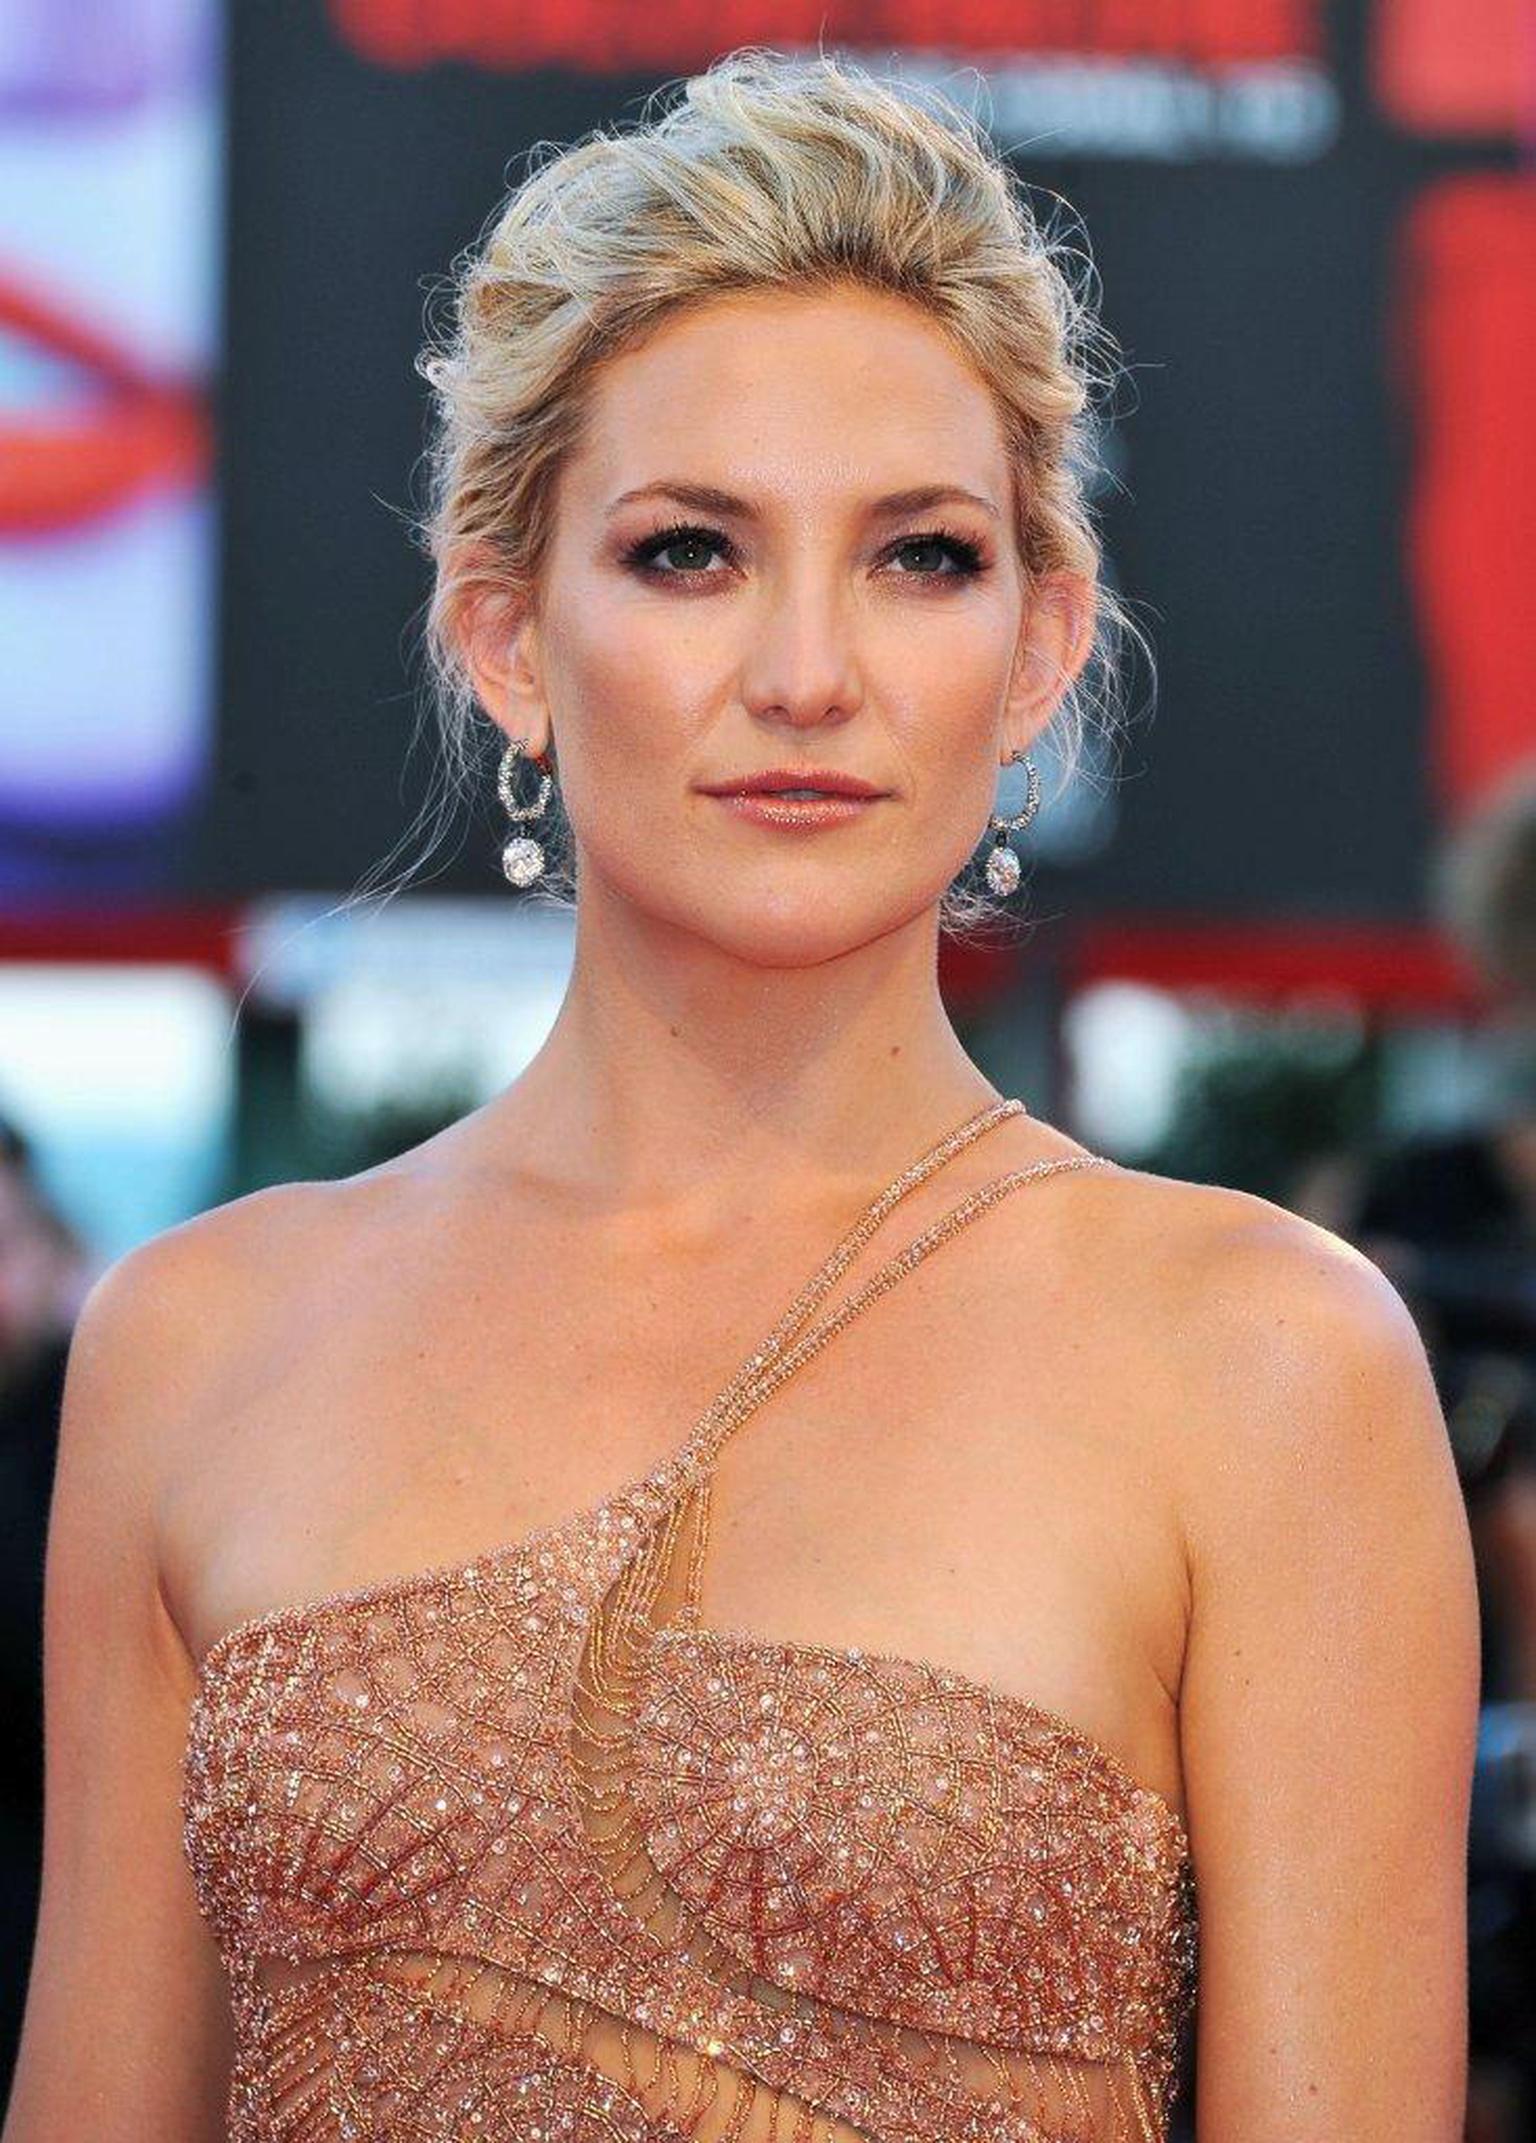 Faberge-Kate-Hudson-in-Faberge-at-Venice-Film-Festival-29.08.12-01